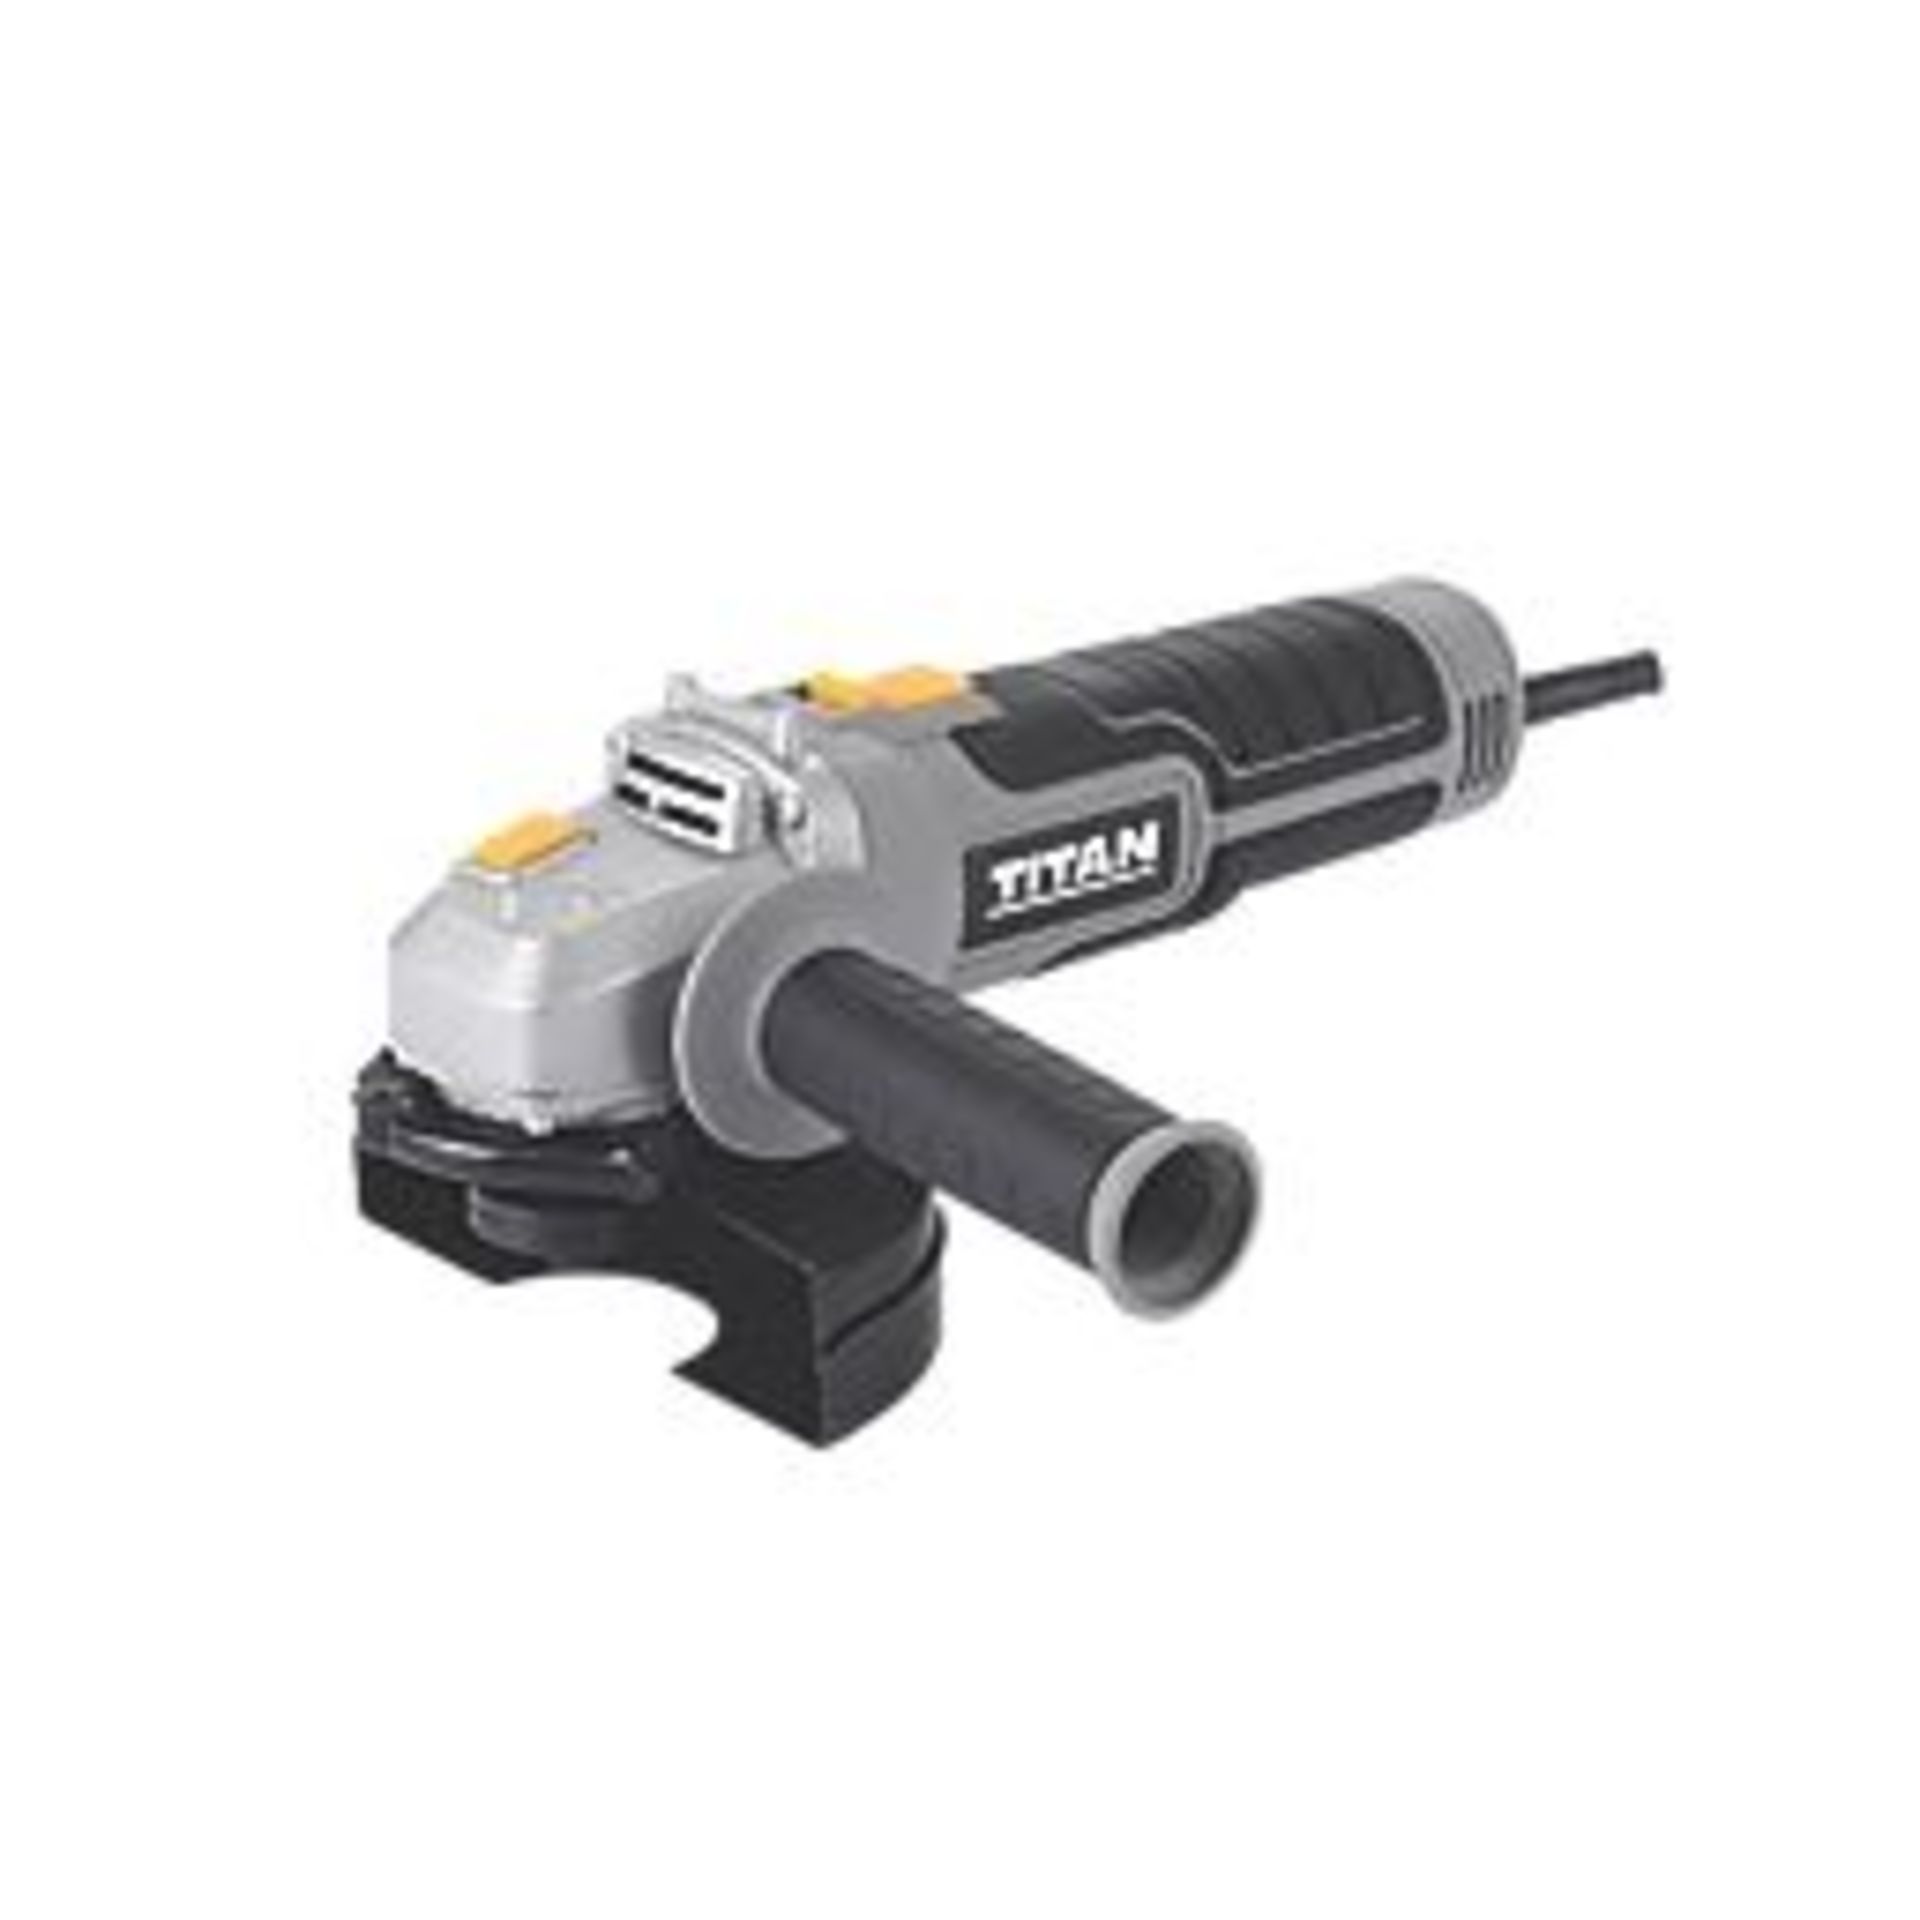 TITAN 750W 4 1/2" ELECTRIC ANGLE GRINDER 240V . -ER42. Makes easy work of cutting through metal